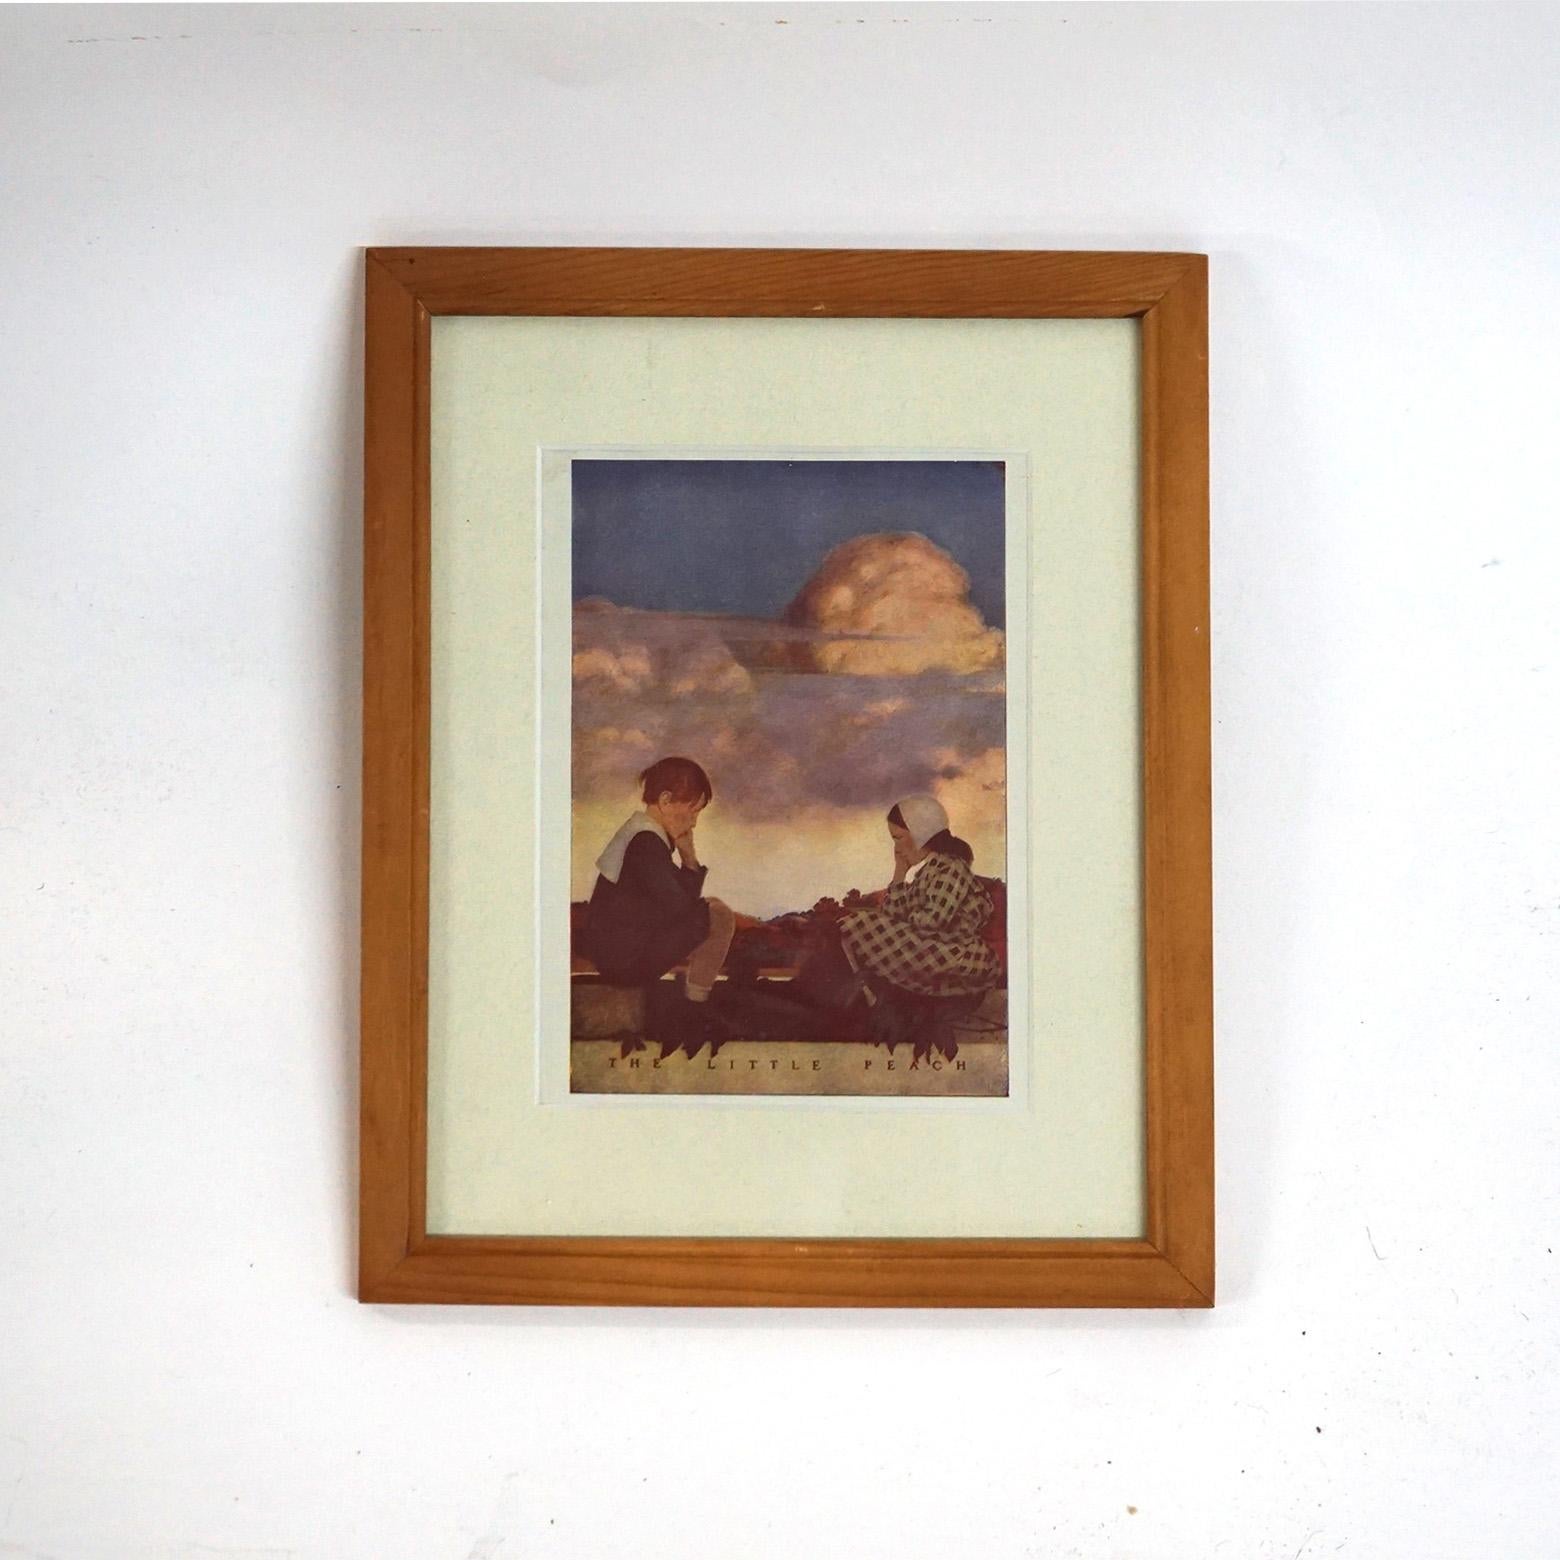 Paper Five Art Deco Maxfield Parrish Bookplates, Framed, C1920 For Sale